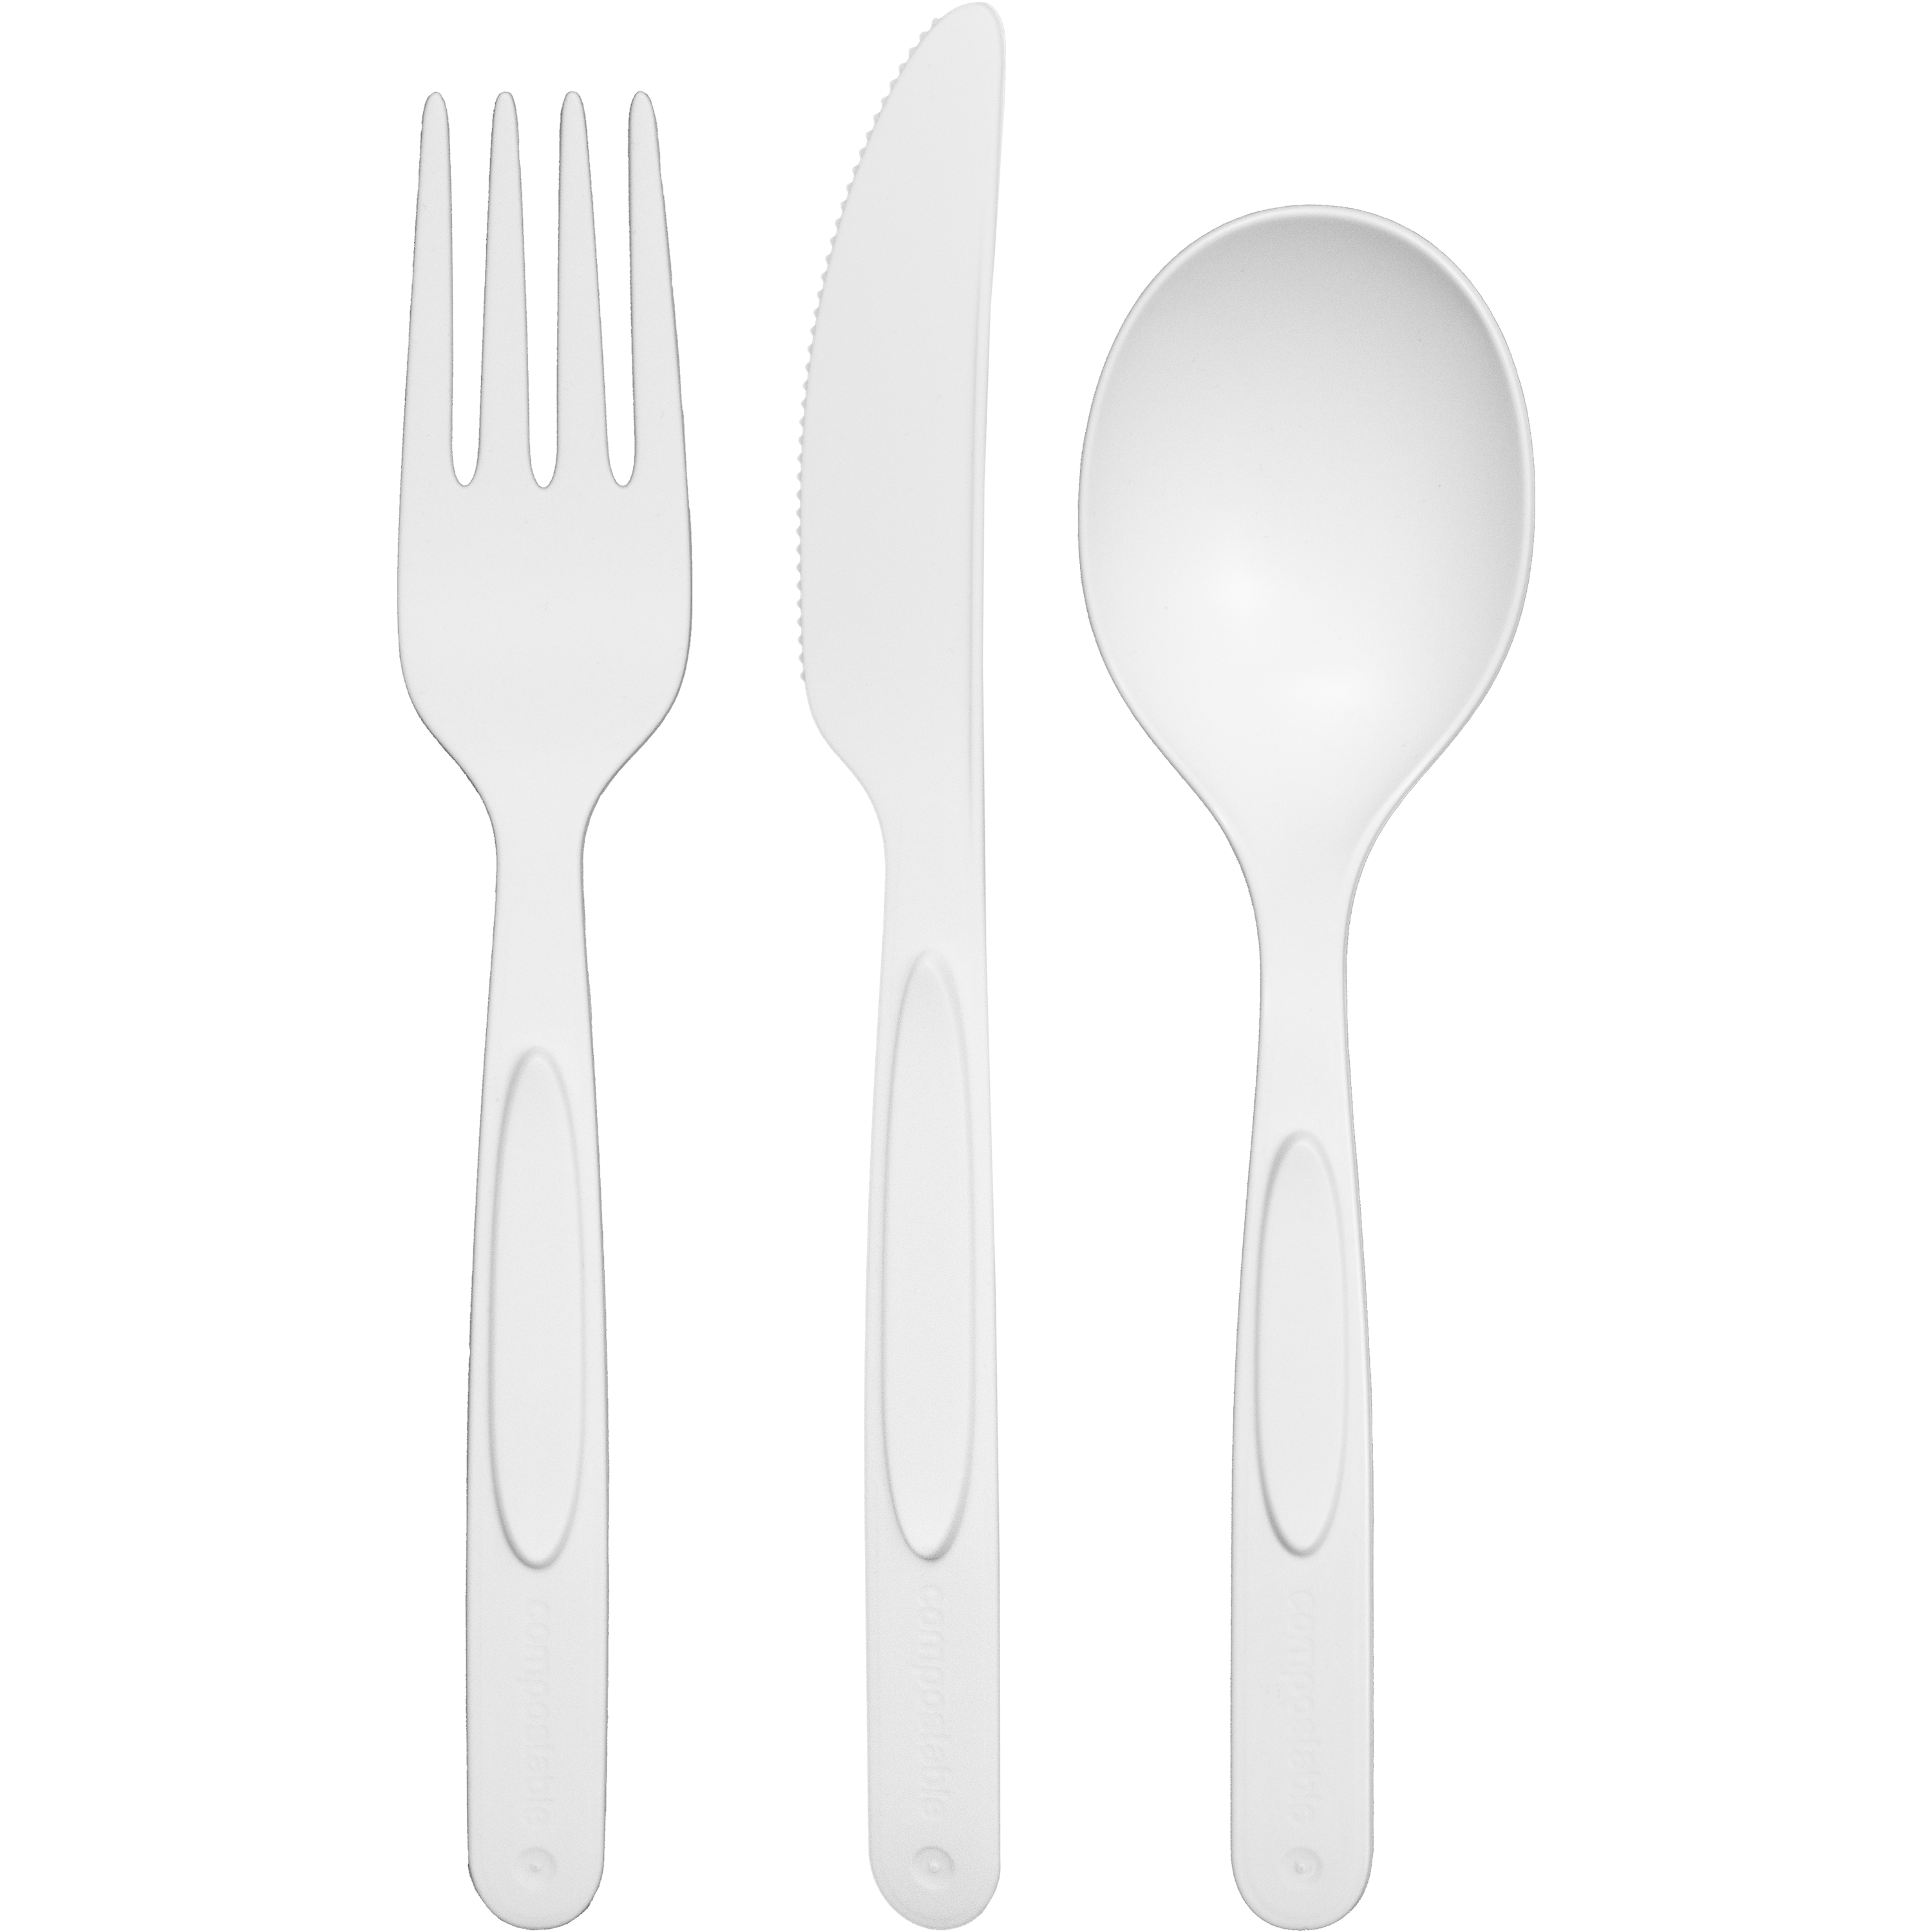 beyondGREEN Plant-Based Disposable Cutlery Utensils – 70 Spoons, 70 Forks, 70 Knives (210 total) - Unwrapped